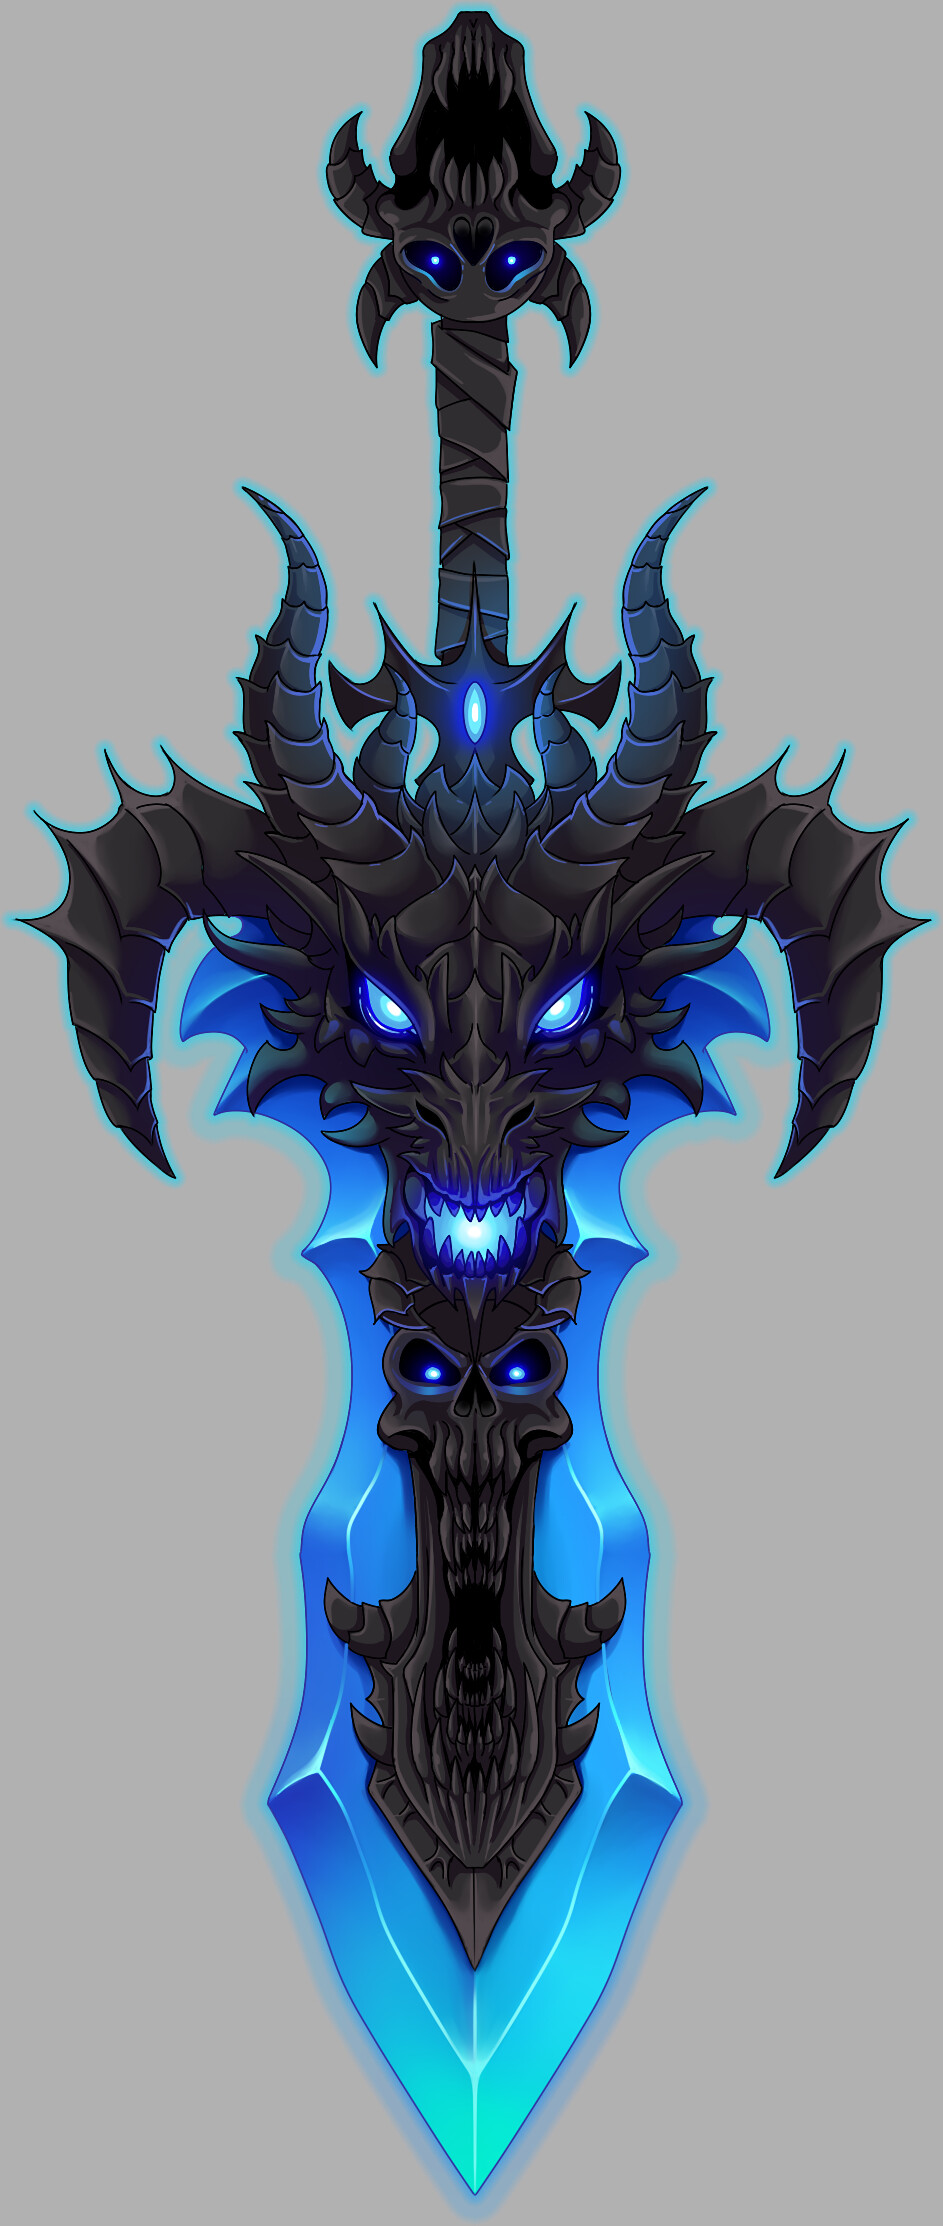 Shy  on X: Finally guys, The New Ac Tagged Item is release on AQW. It's  The Underworld and Legion DragonBlade of Nulgath. There is 2 versions but  only the one from